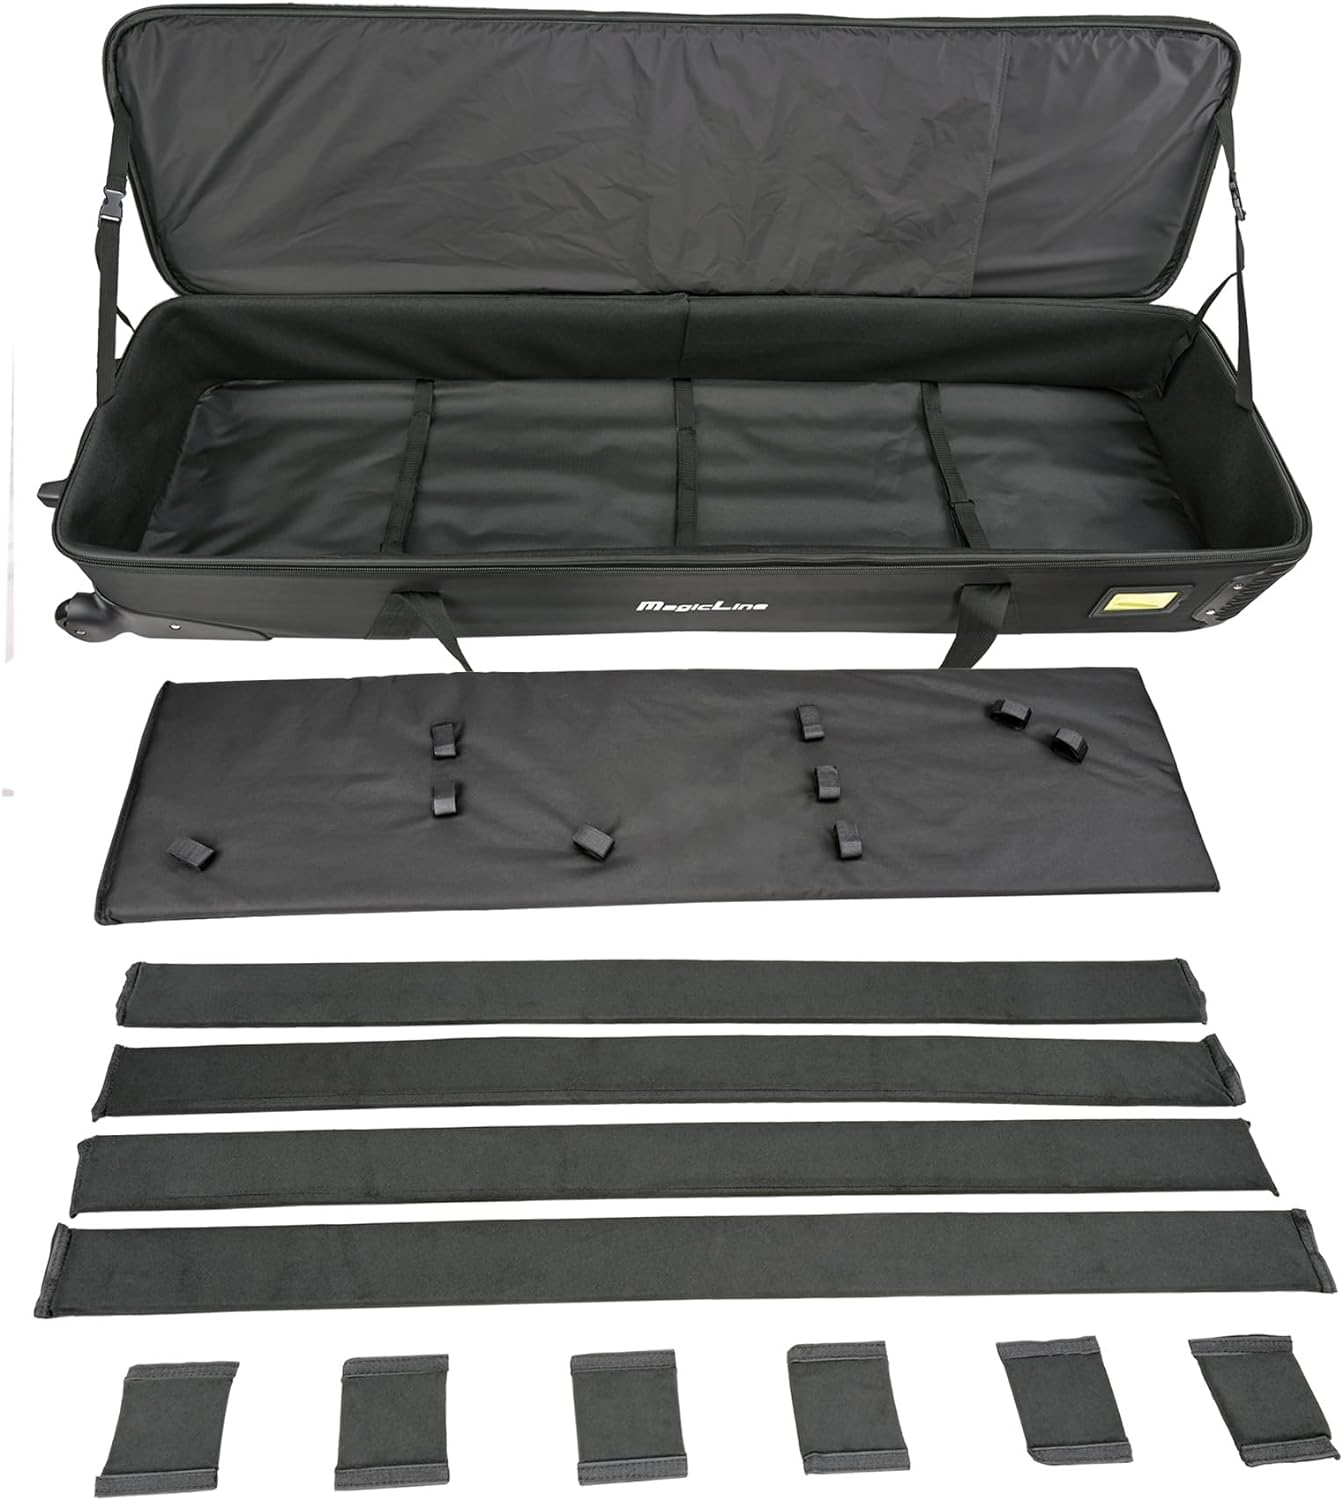 MagicLine Rolling Case for Three&nbsp;C Stands with Removable Base 56.3x15.7x8.7 inch/143x40x22 cm, Studio Trolley Case, Carrying Bag with Wheels for C stands, Light Stands and Tripods